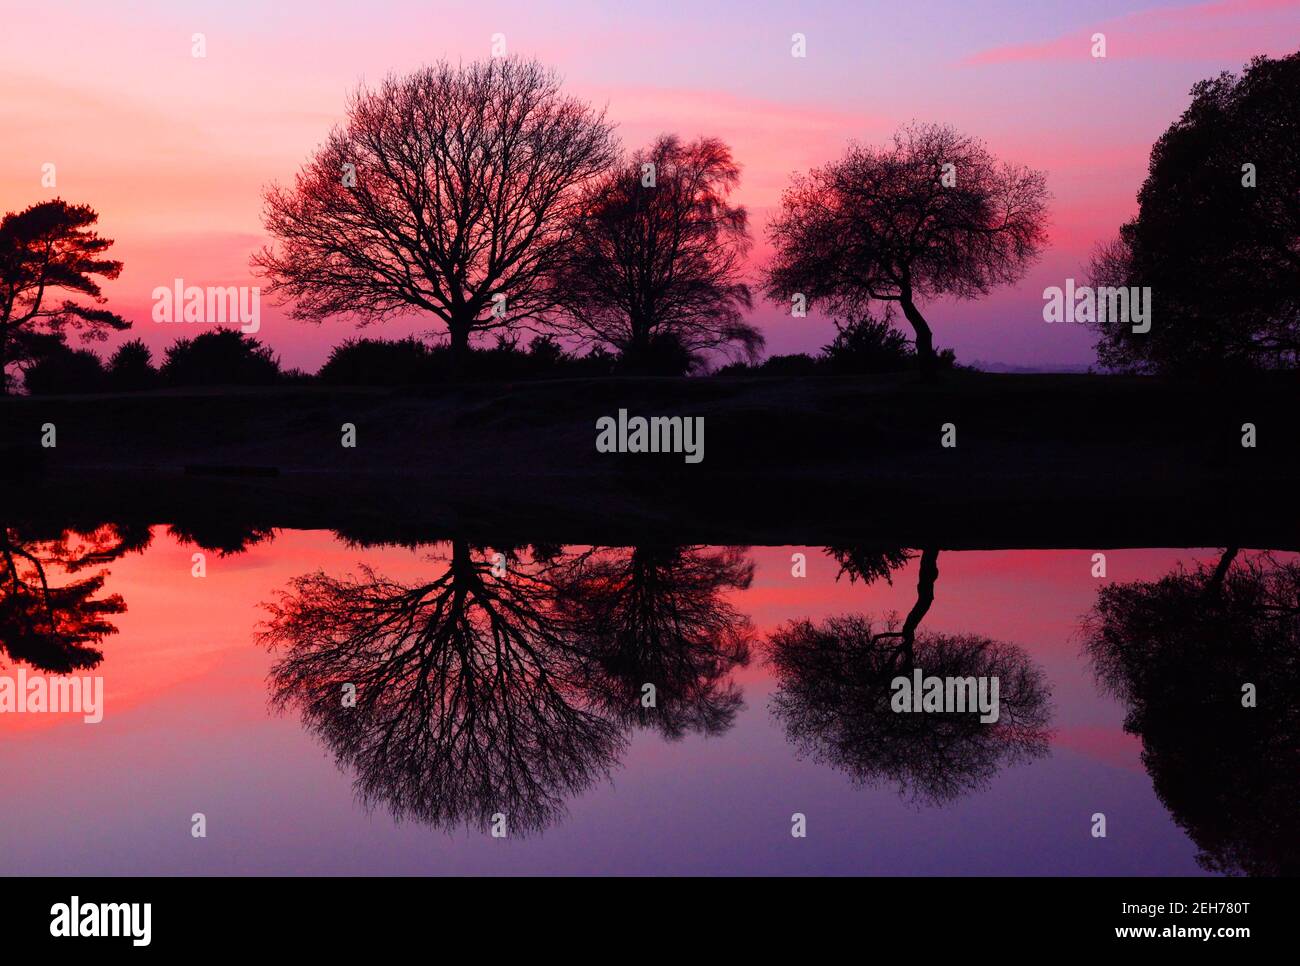 Three trees silhouetted with reflections at sunset with pink and purple sky. Setley Pond, the New Forest. Stock Photo